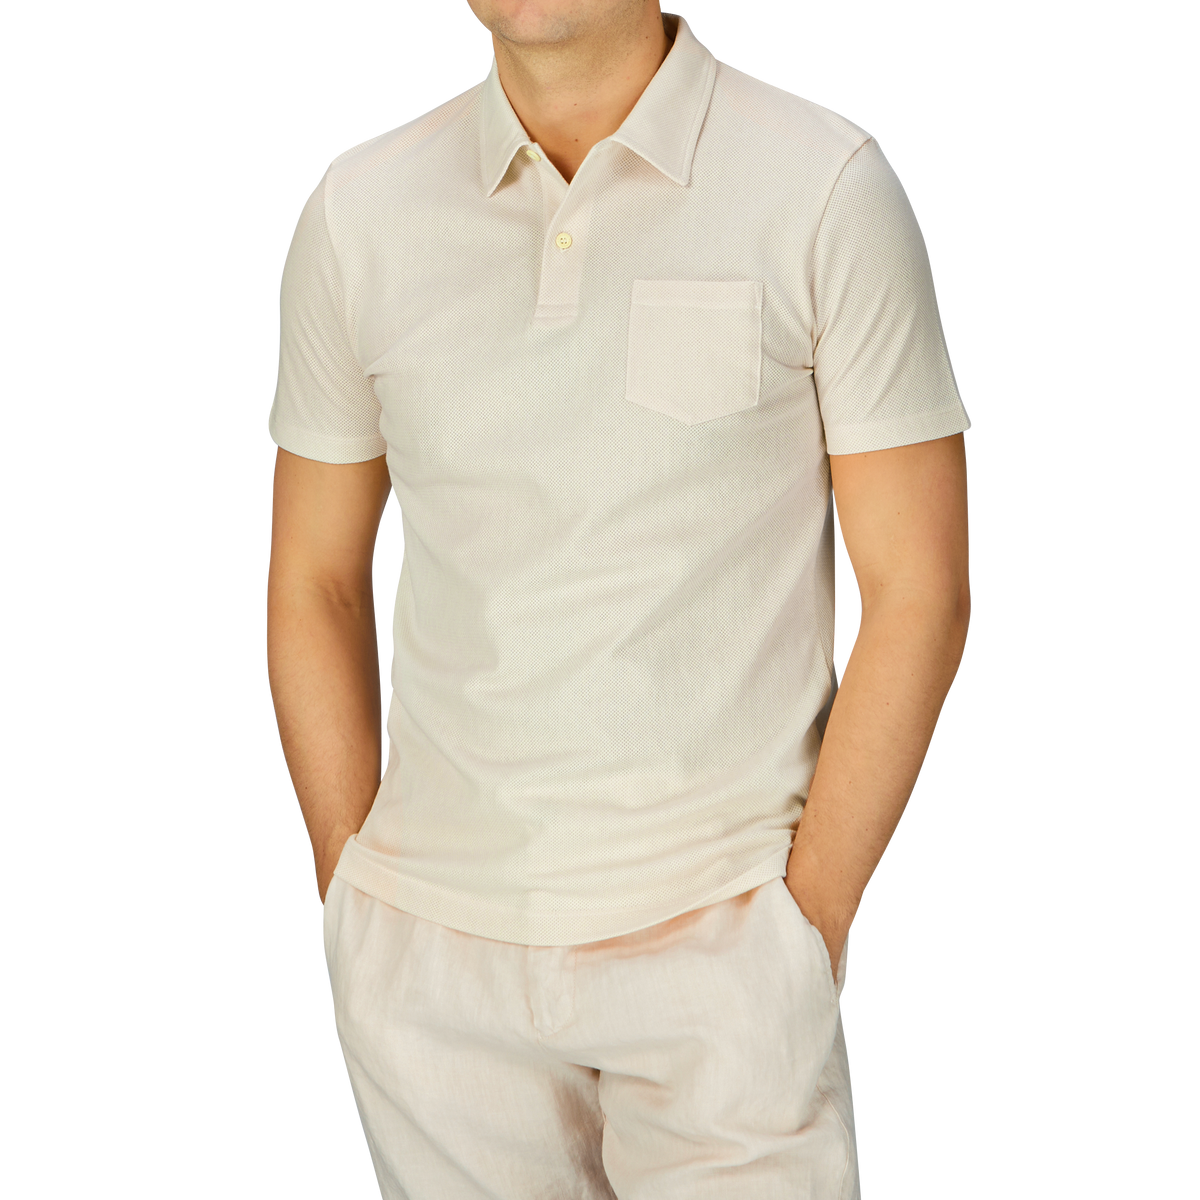 A man dressed in an Undyed Cotton Riviera Polo Shirt by Sunspel.